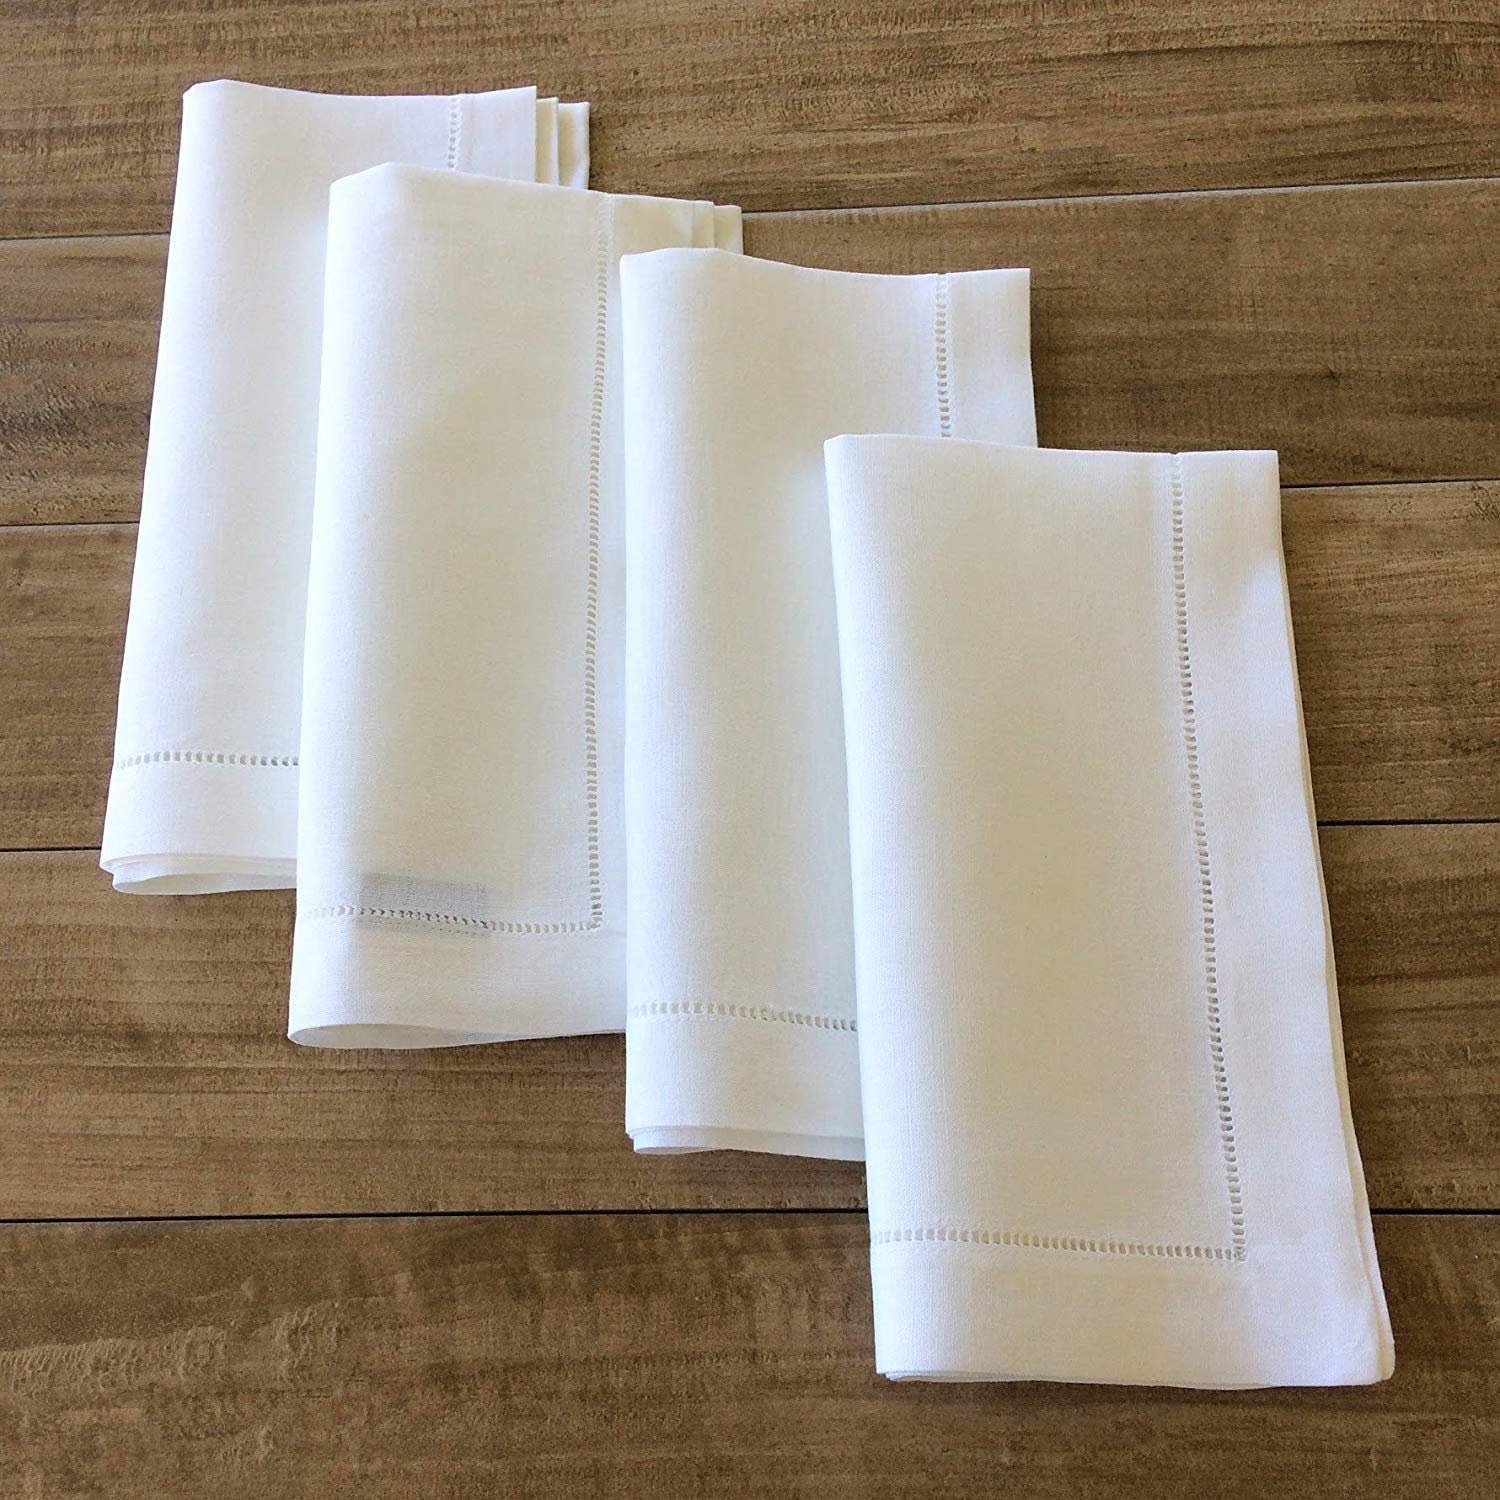 Thanksgiving Linen Napkins - White and Natural 20 x 20 inch, Set of 4 Luxe Hemstitch Dinner Napkins Cloth Washable from 100% French Linen for